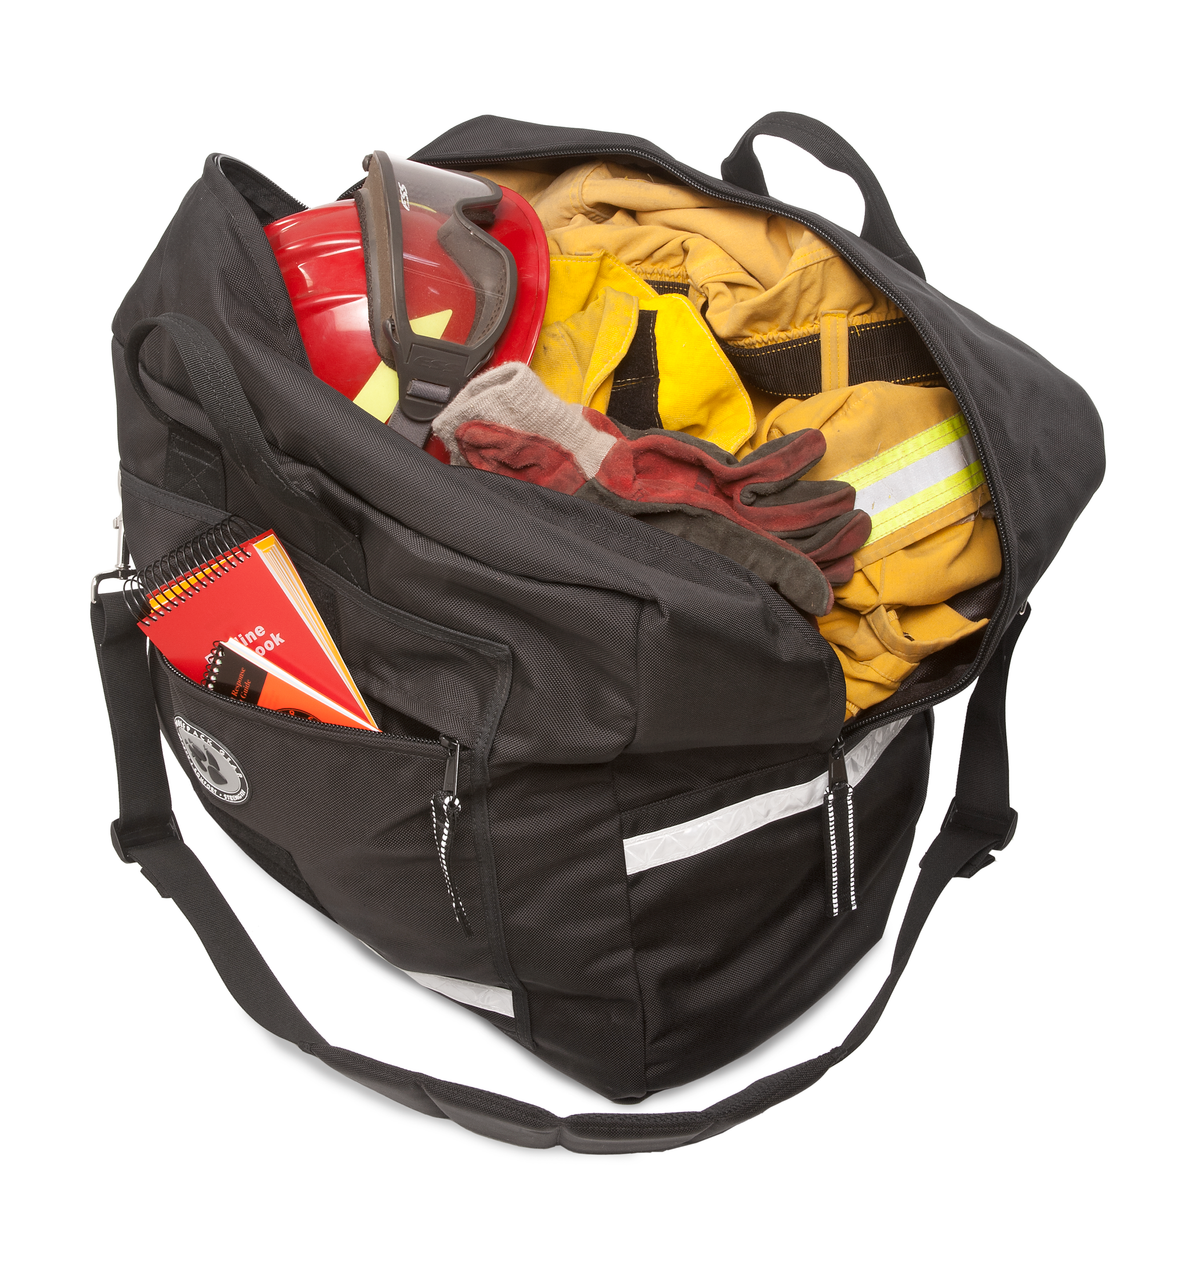 PPE-BAG_WITH_GEAR__66288.1570558673.1280.1280.png